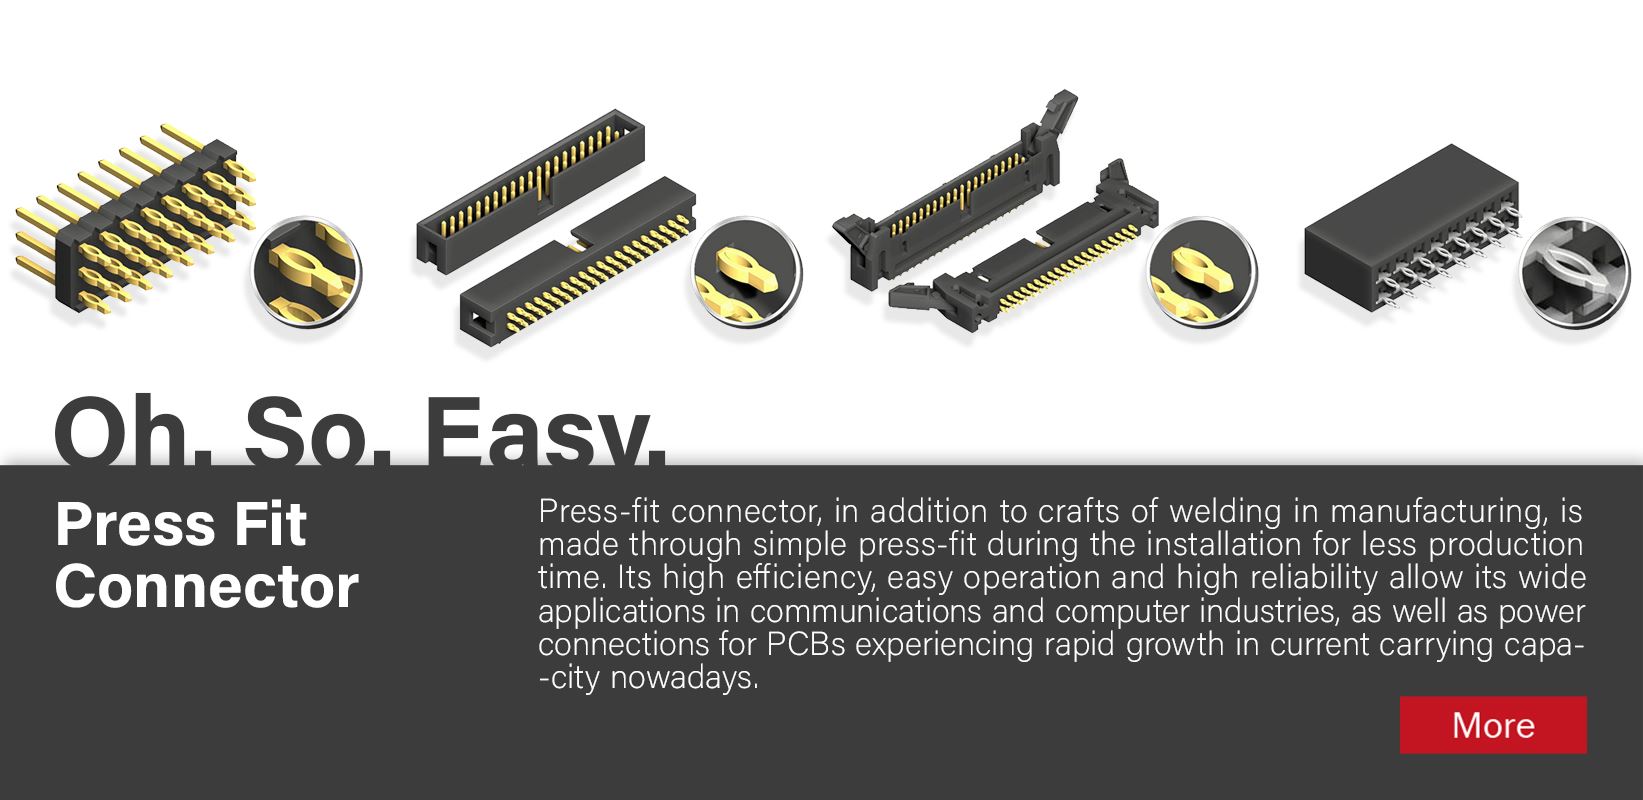 Oh. So. Easy. Press Fit Connector